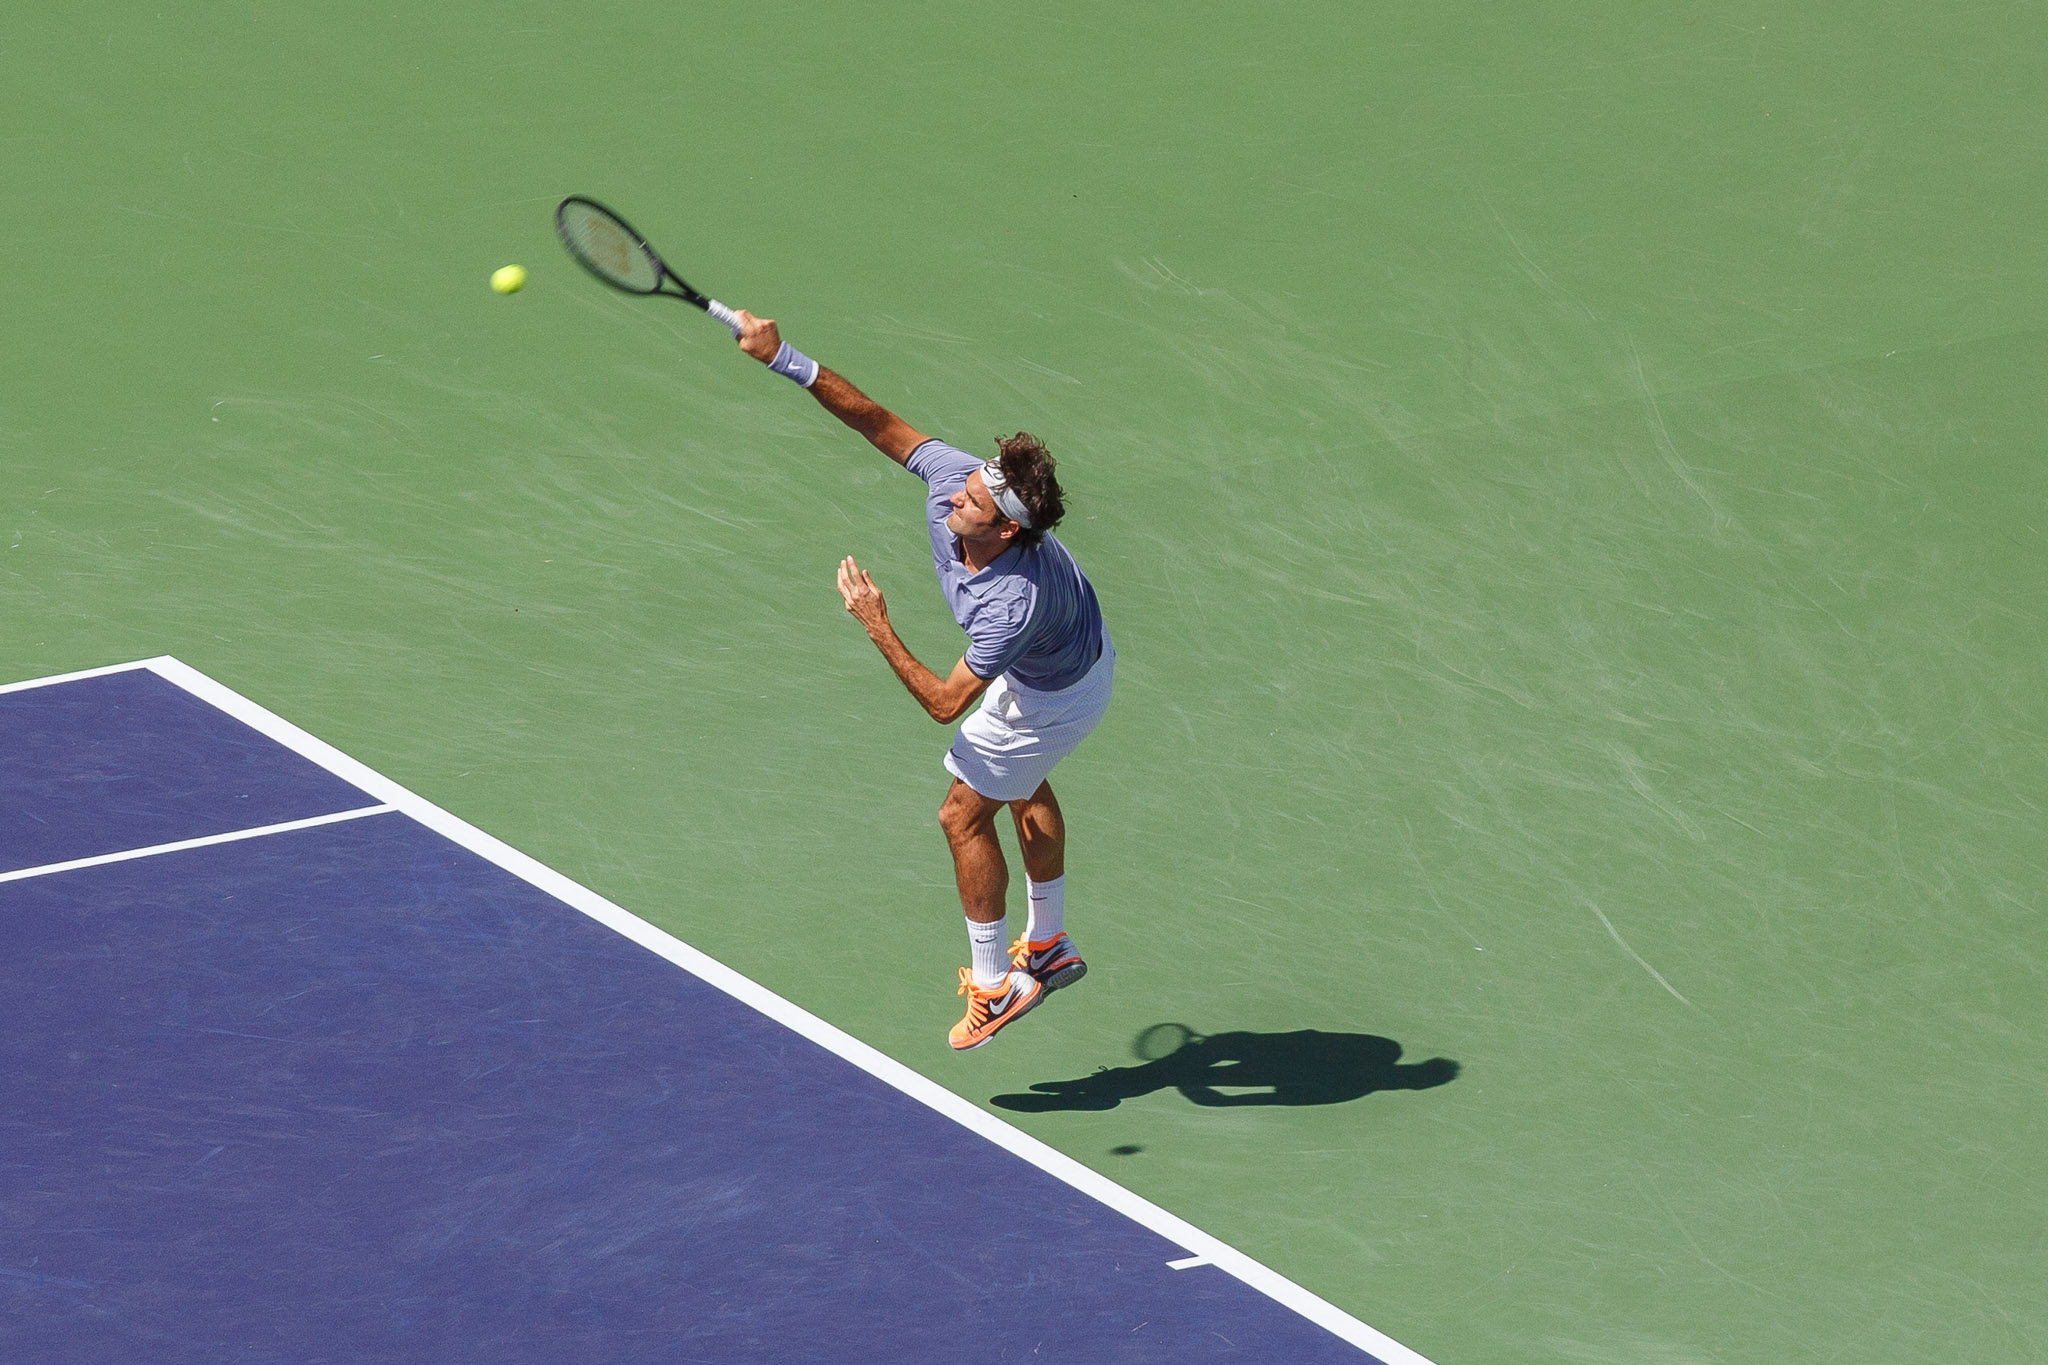 a tennis player wearing blue jumps as he hits the ball